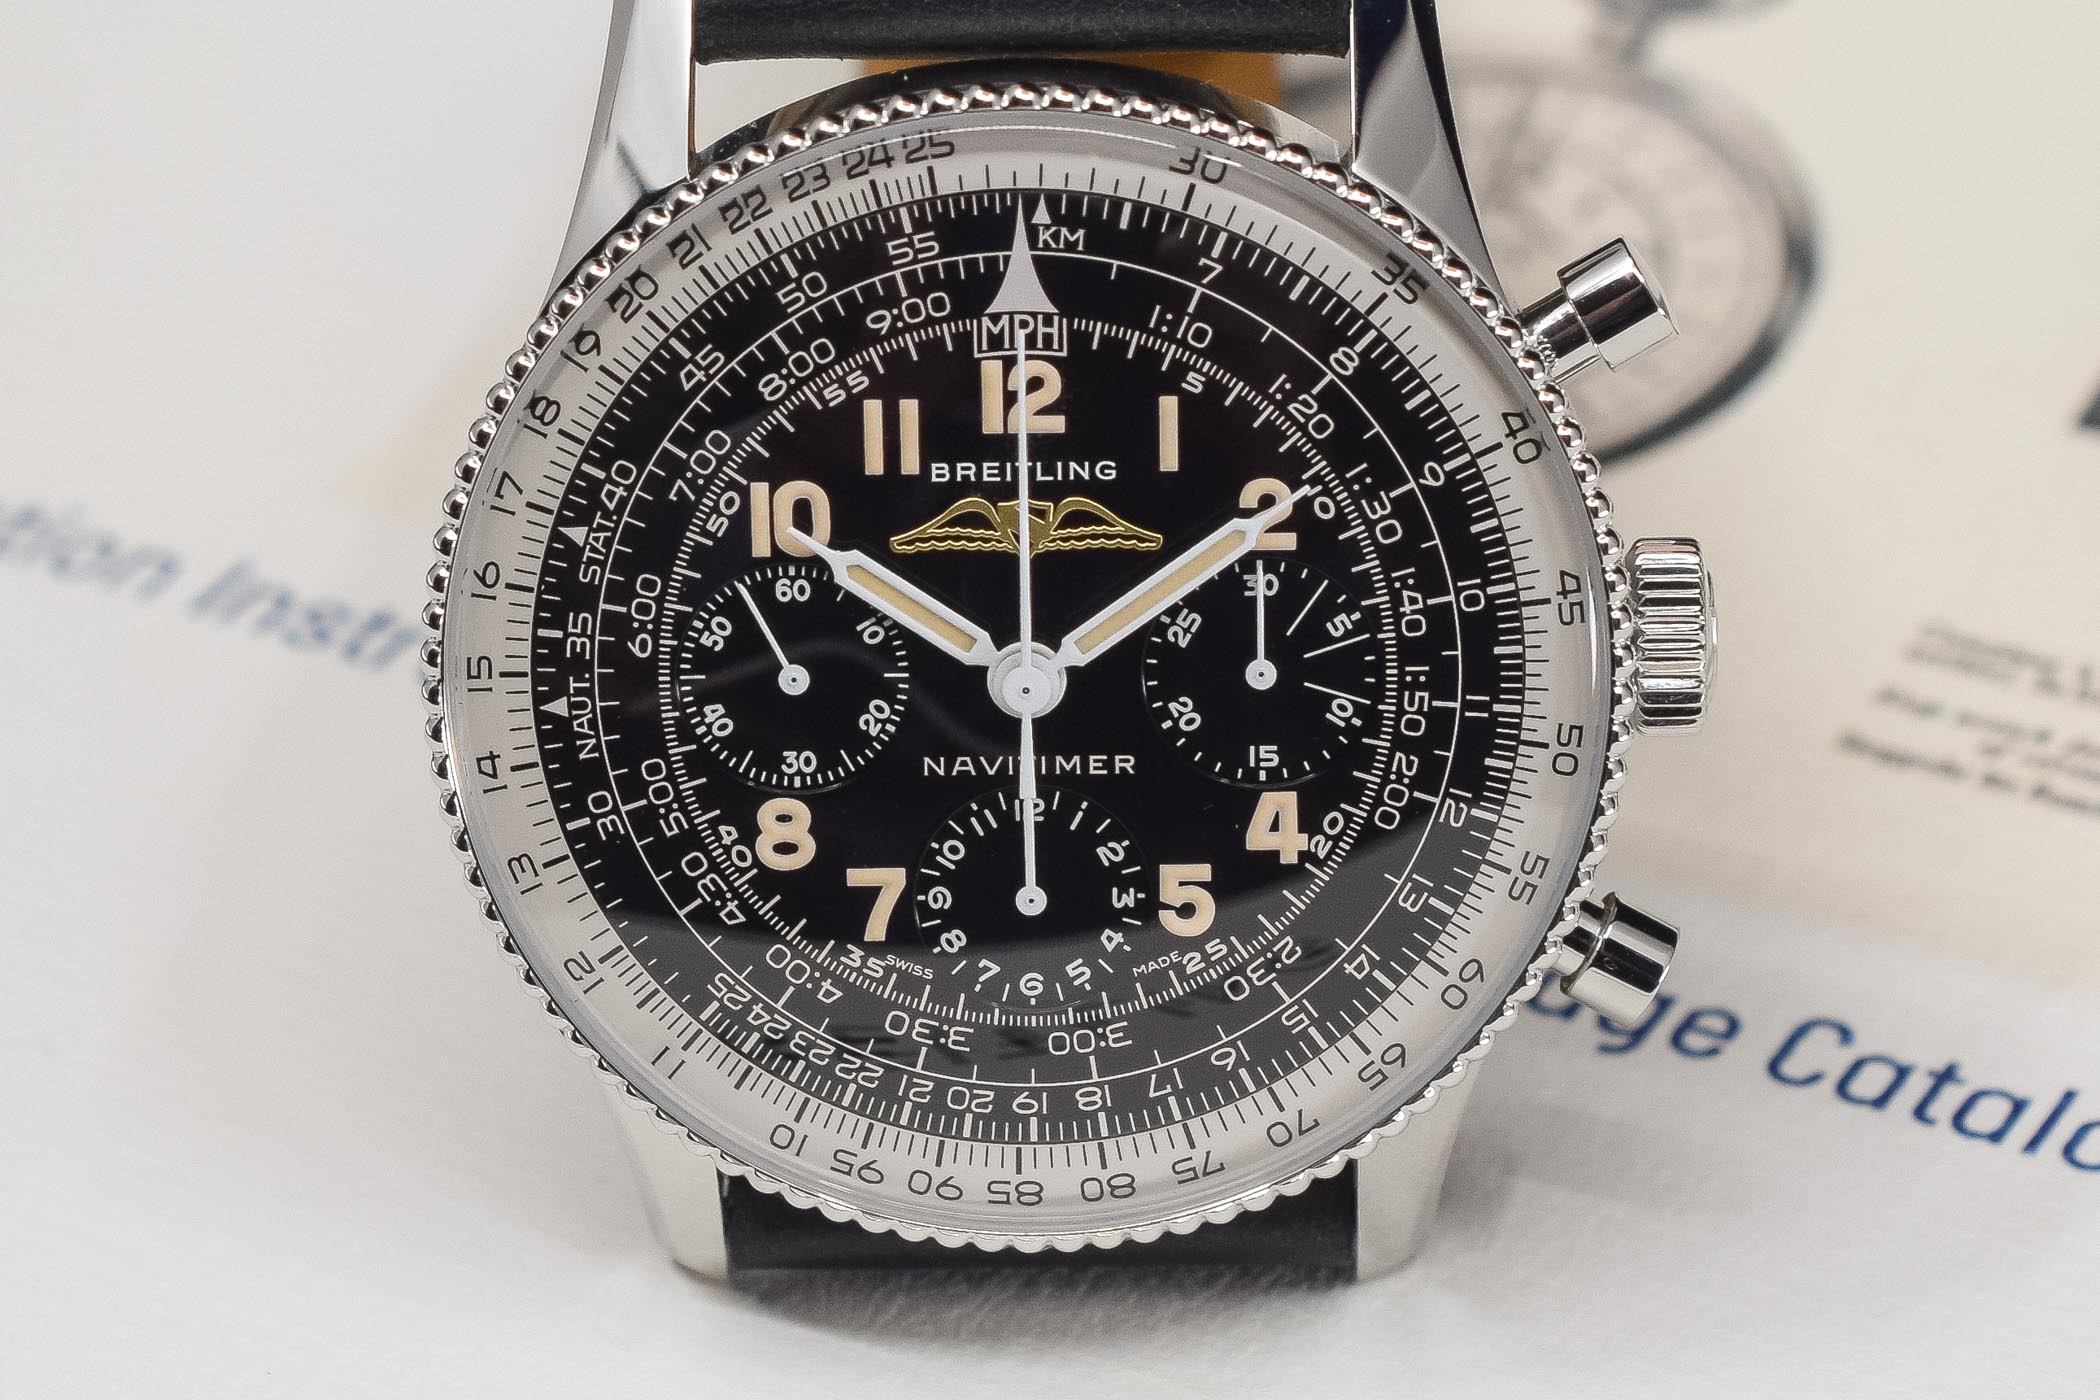 Breitling Navitimer Ref 806 1959 Re‑Edition - review - 5